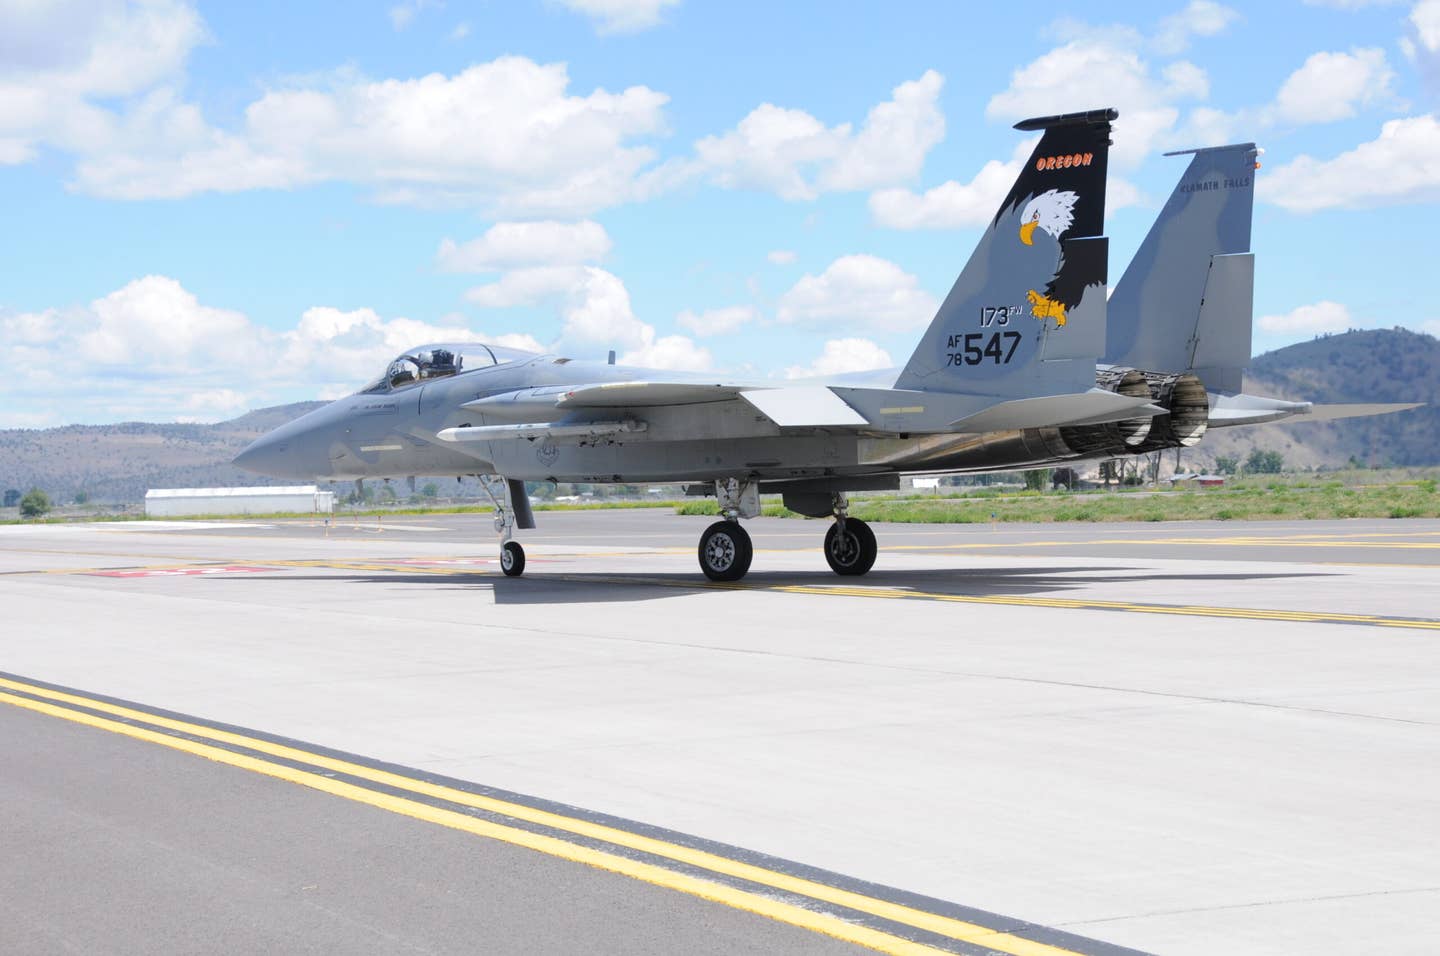 An F-15C, assigned to the 173rd Fighter Wing, Oregon Air National Guard, prepares to depart from Kingsley Field in Klamath Falls, Oregon, for a training mission. <em>U.S. Air National Guard photo by Master Sgt. Jennifer Shirar/Released</em>